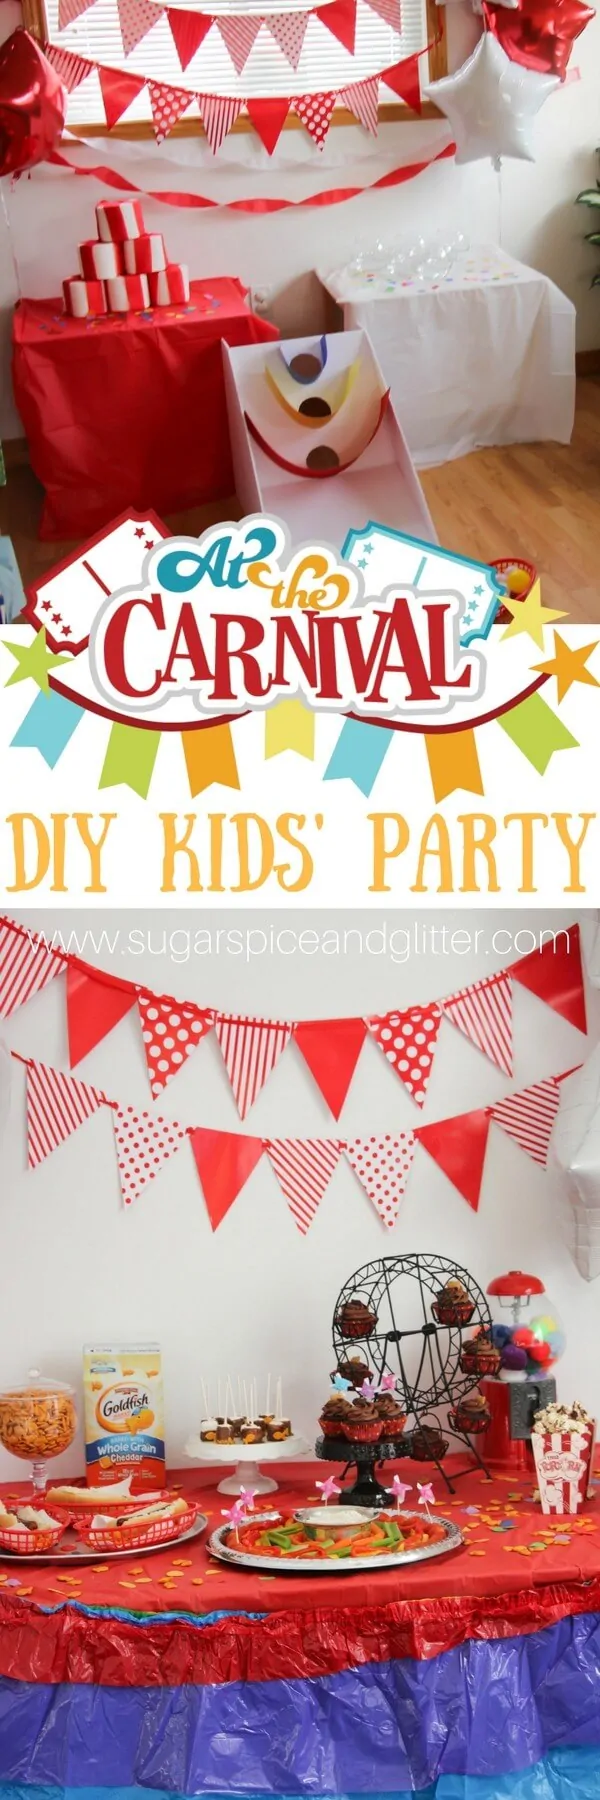 DIY Carnival Kids Party with 5 games under $5, easy themed decor and a mix of healthy and carnival-inspired treats.